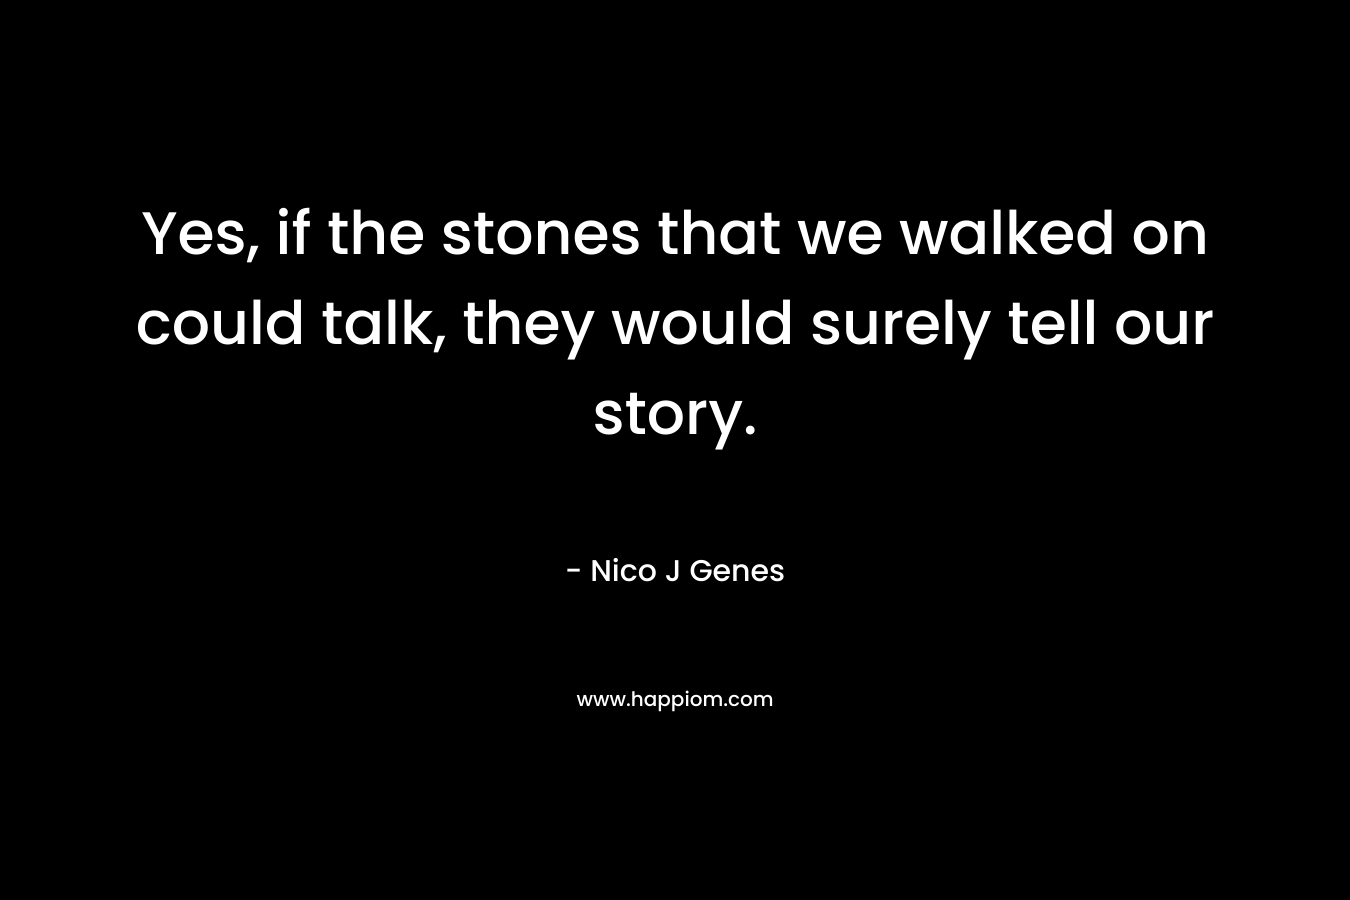 Yes, if the stones that we walked on could talk, they would surely tell our story.